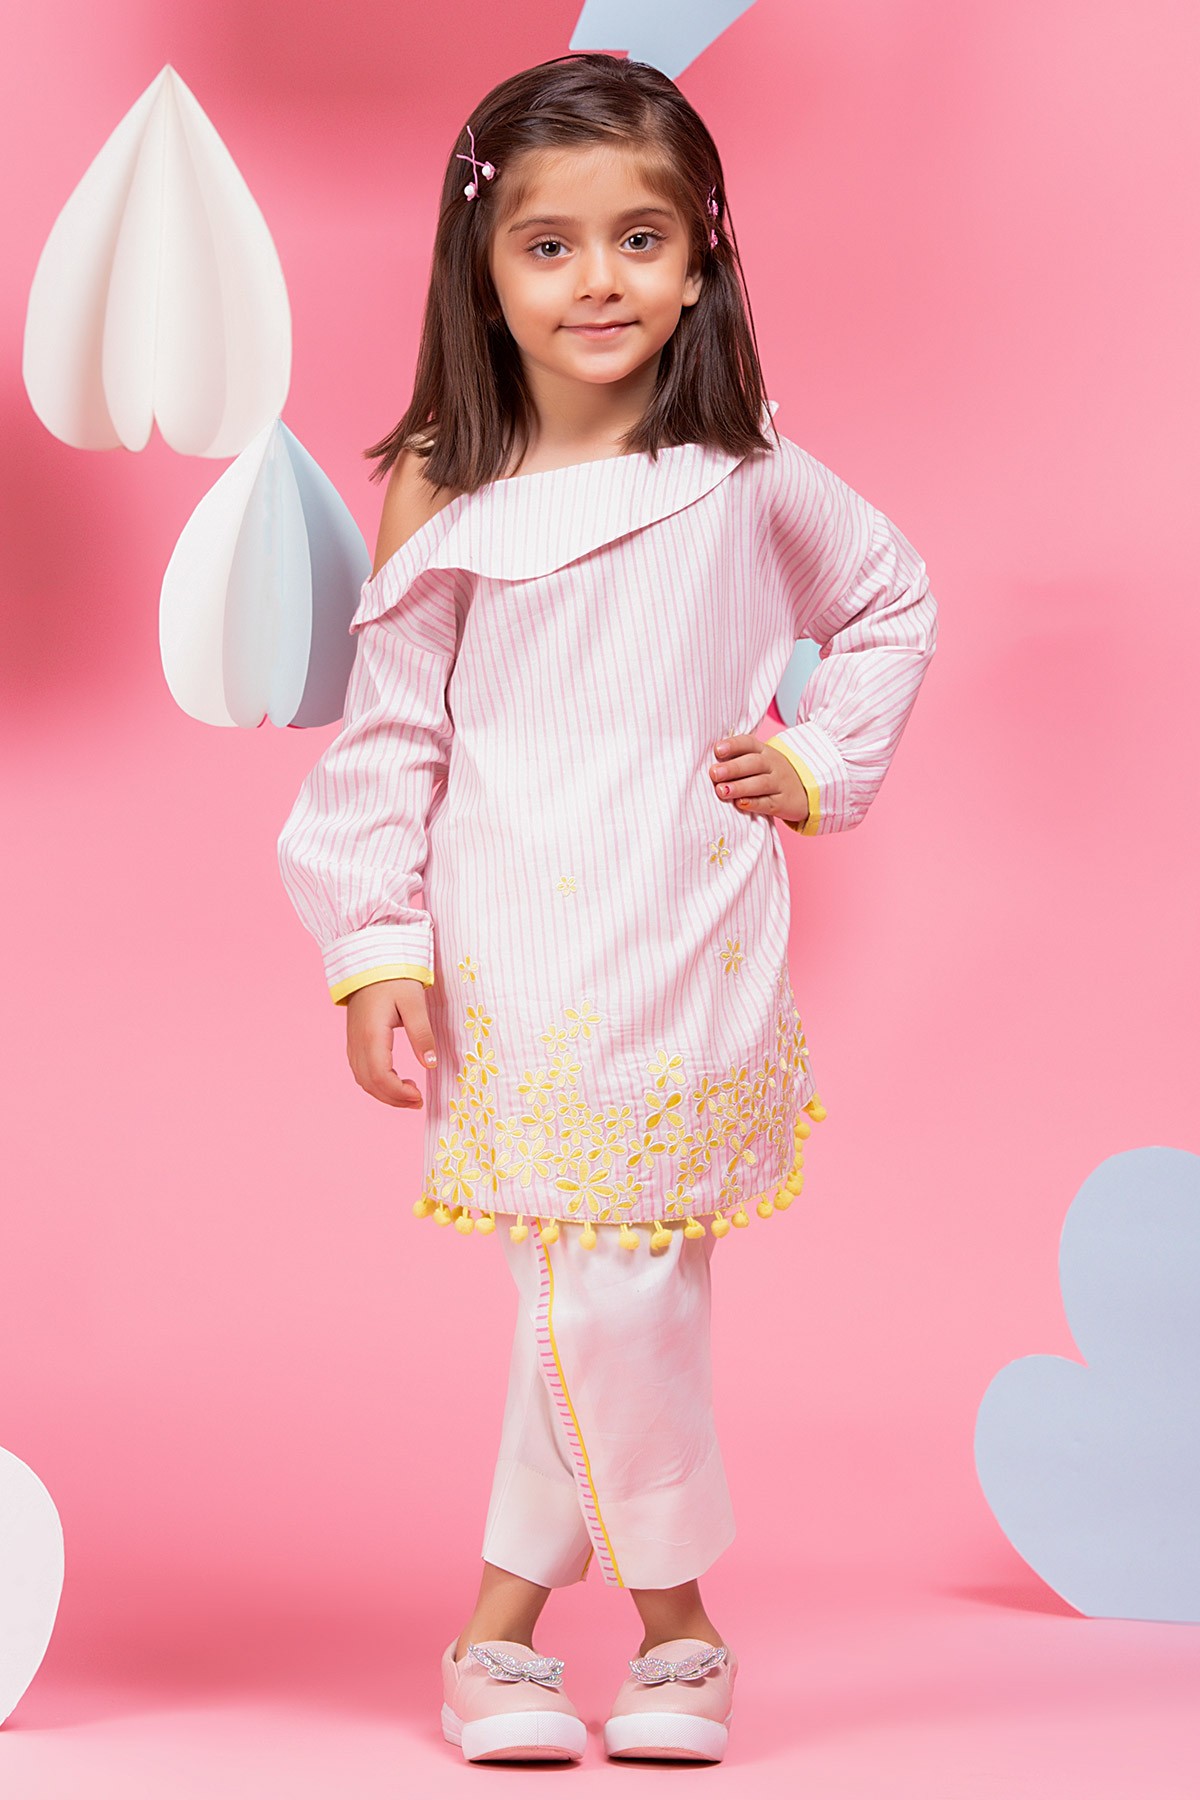 New Eid Dresses for Kids 2023 With Price {New Designs}